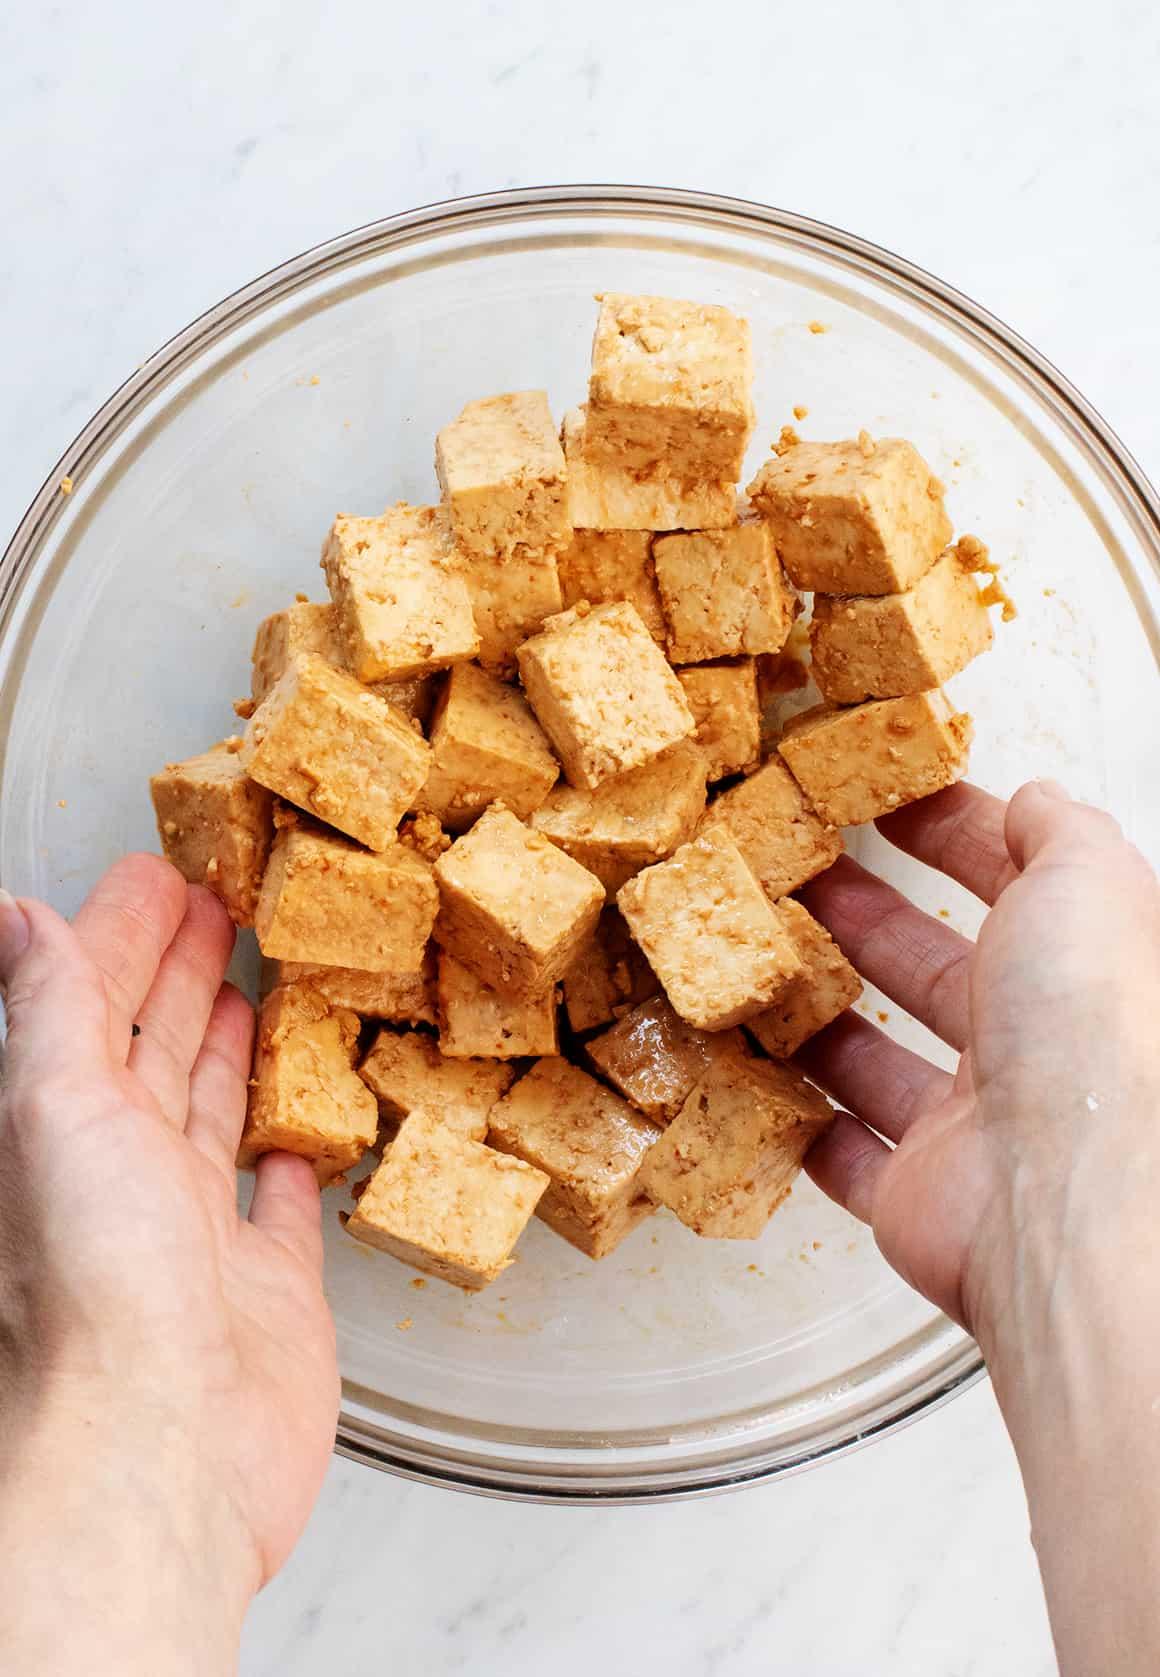 Hands tossing cubed tofu with seasonings in glass bowl